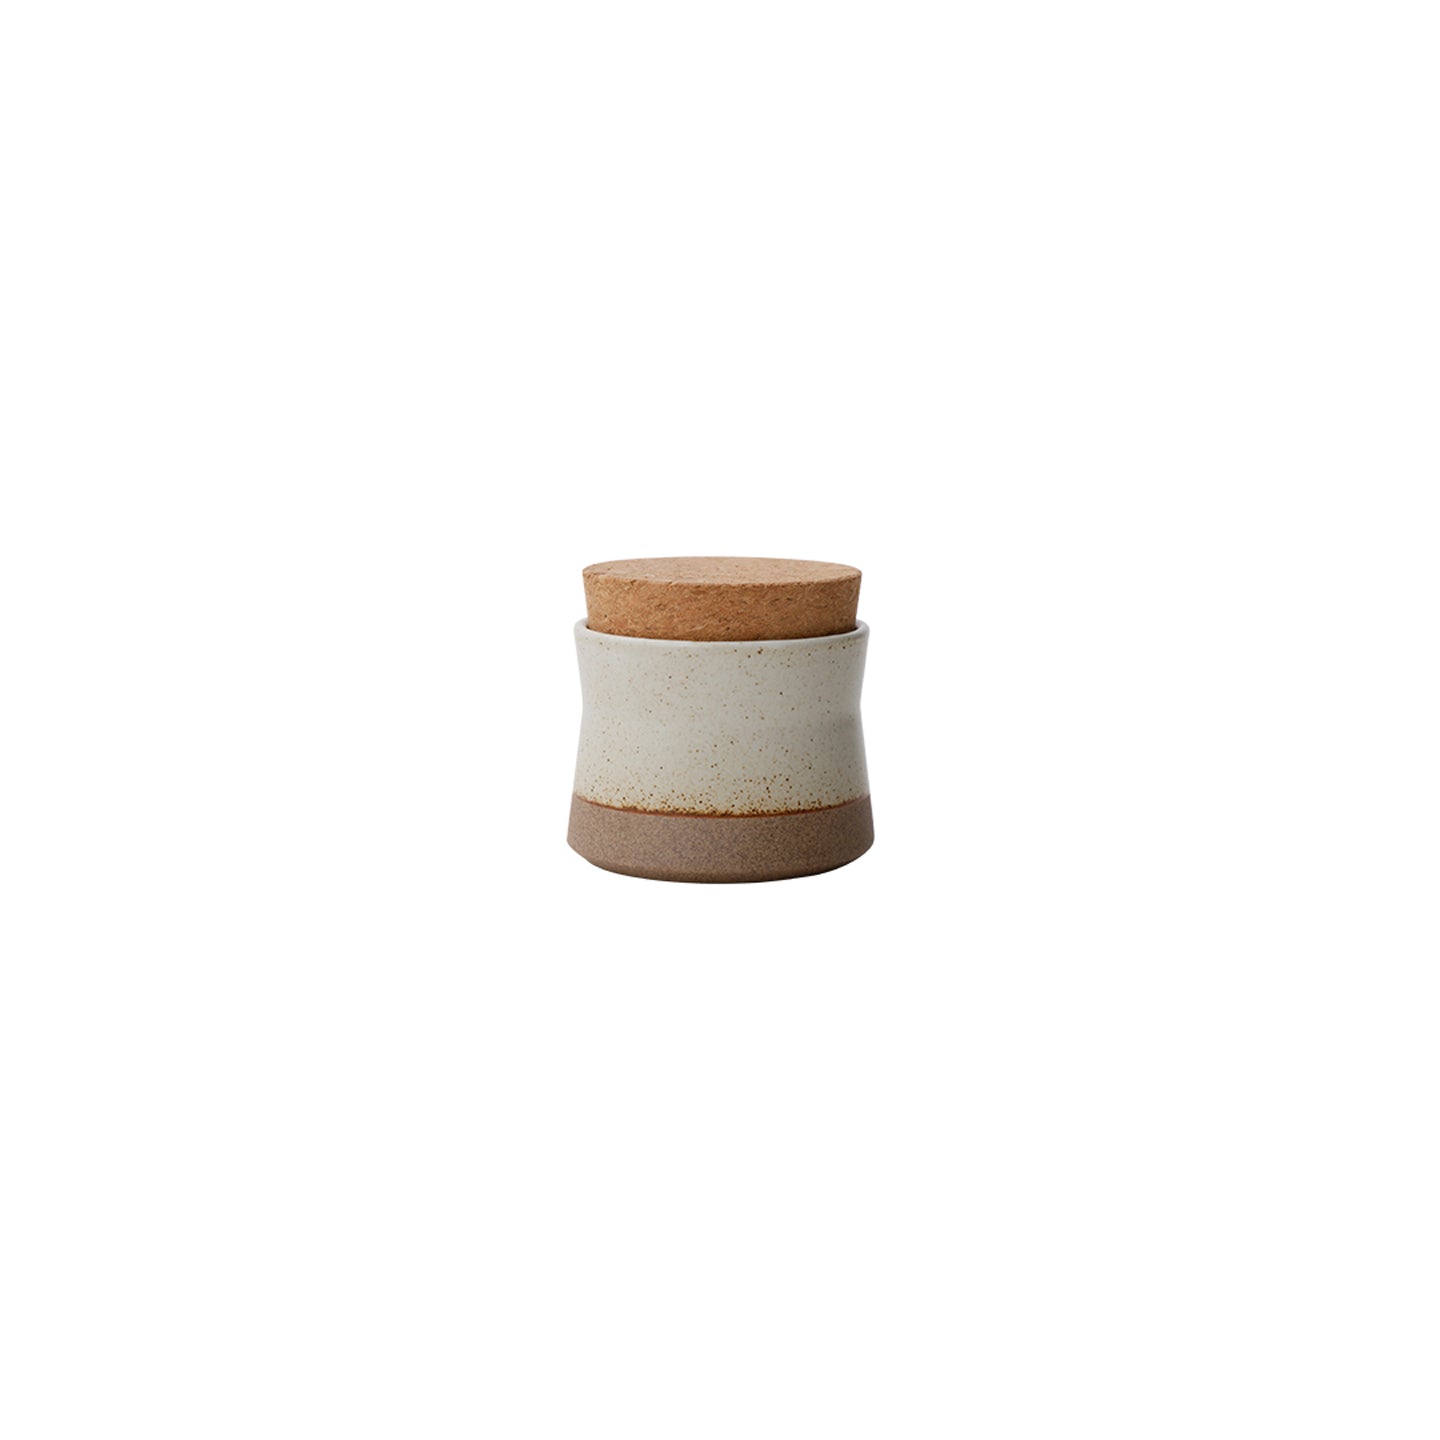 Kinto Ceramic Lab Canister / White